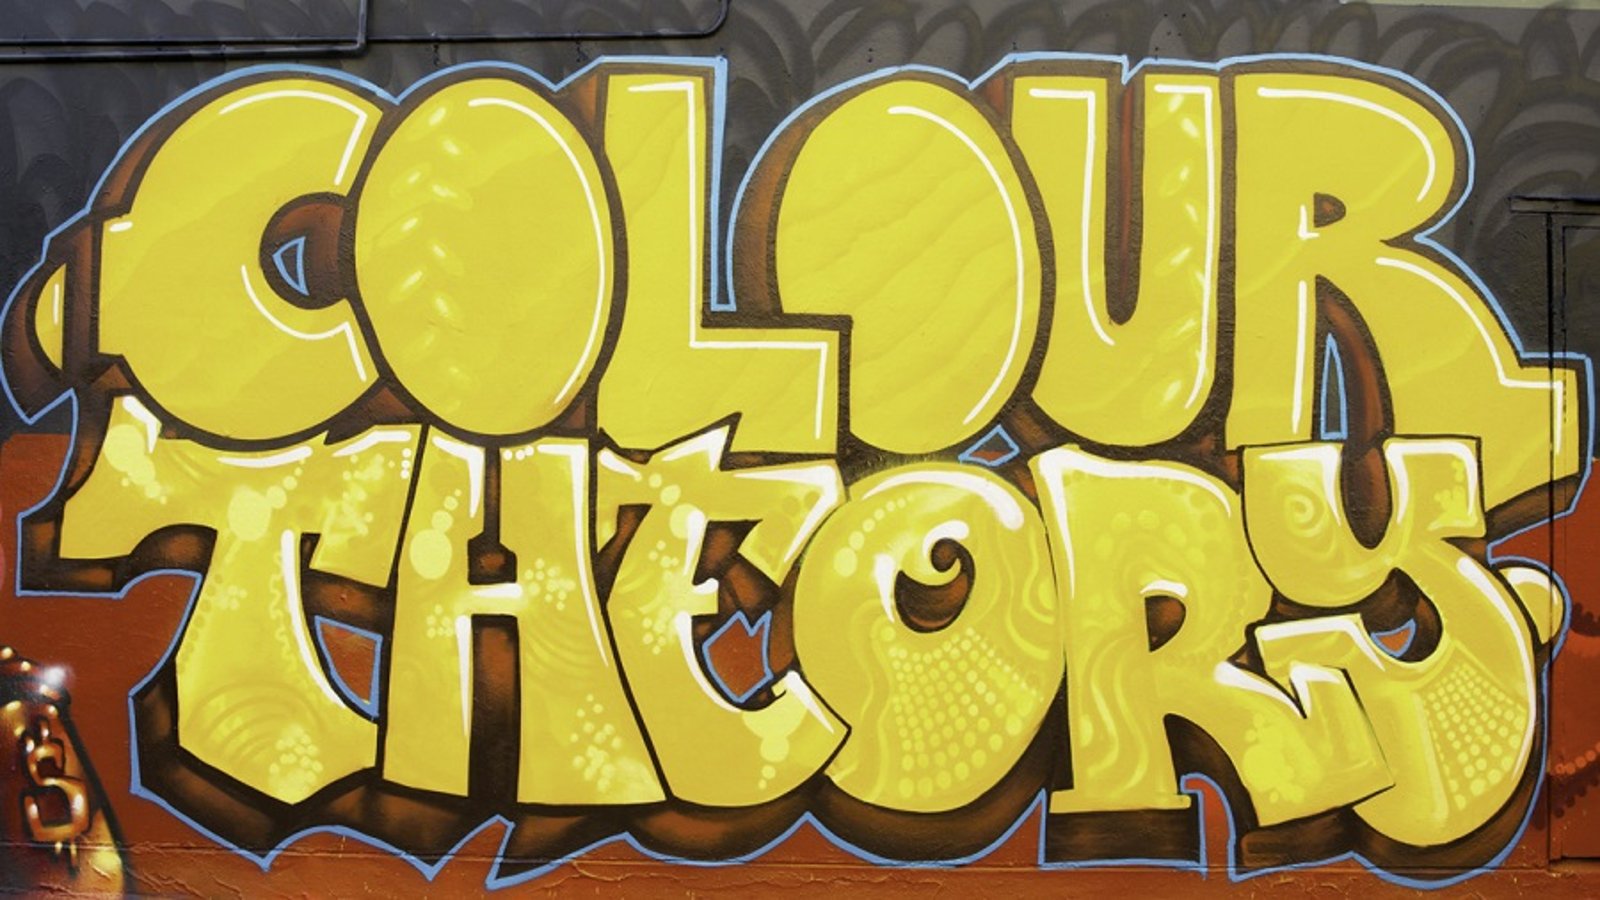 Colour Theory: Series 4 - Indigenous Graffiti and Street Artists